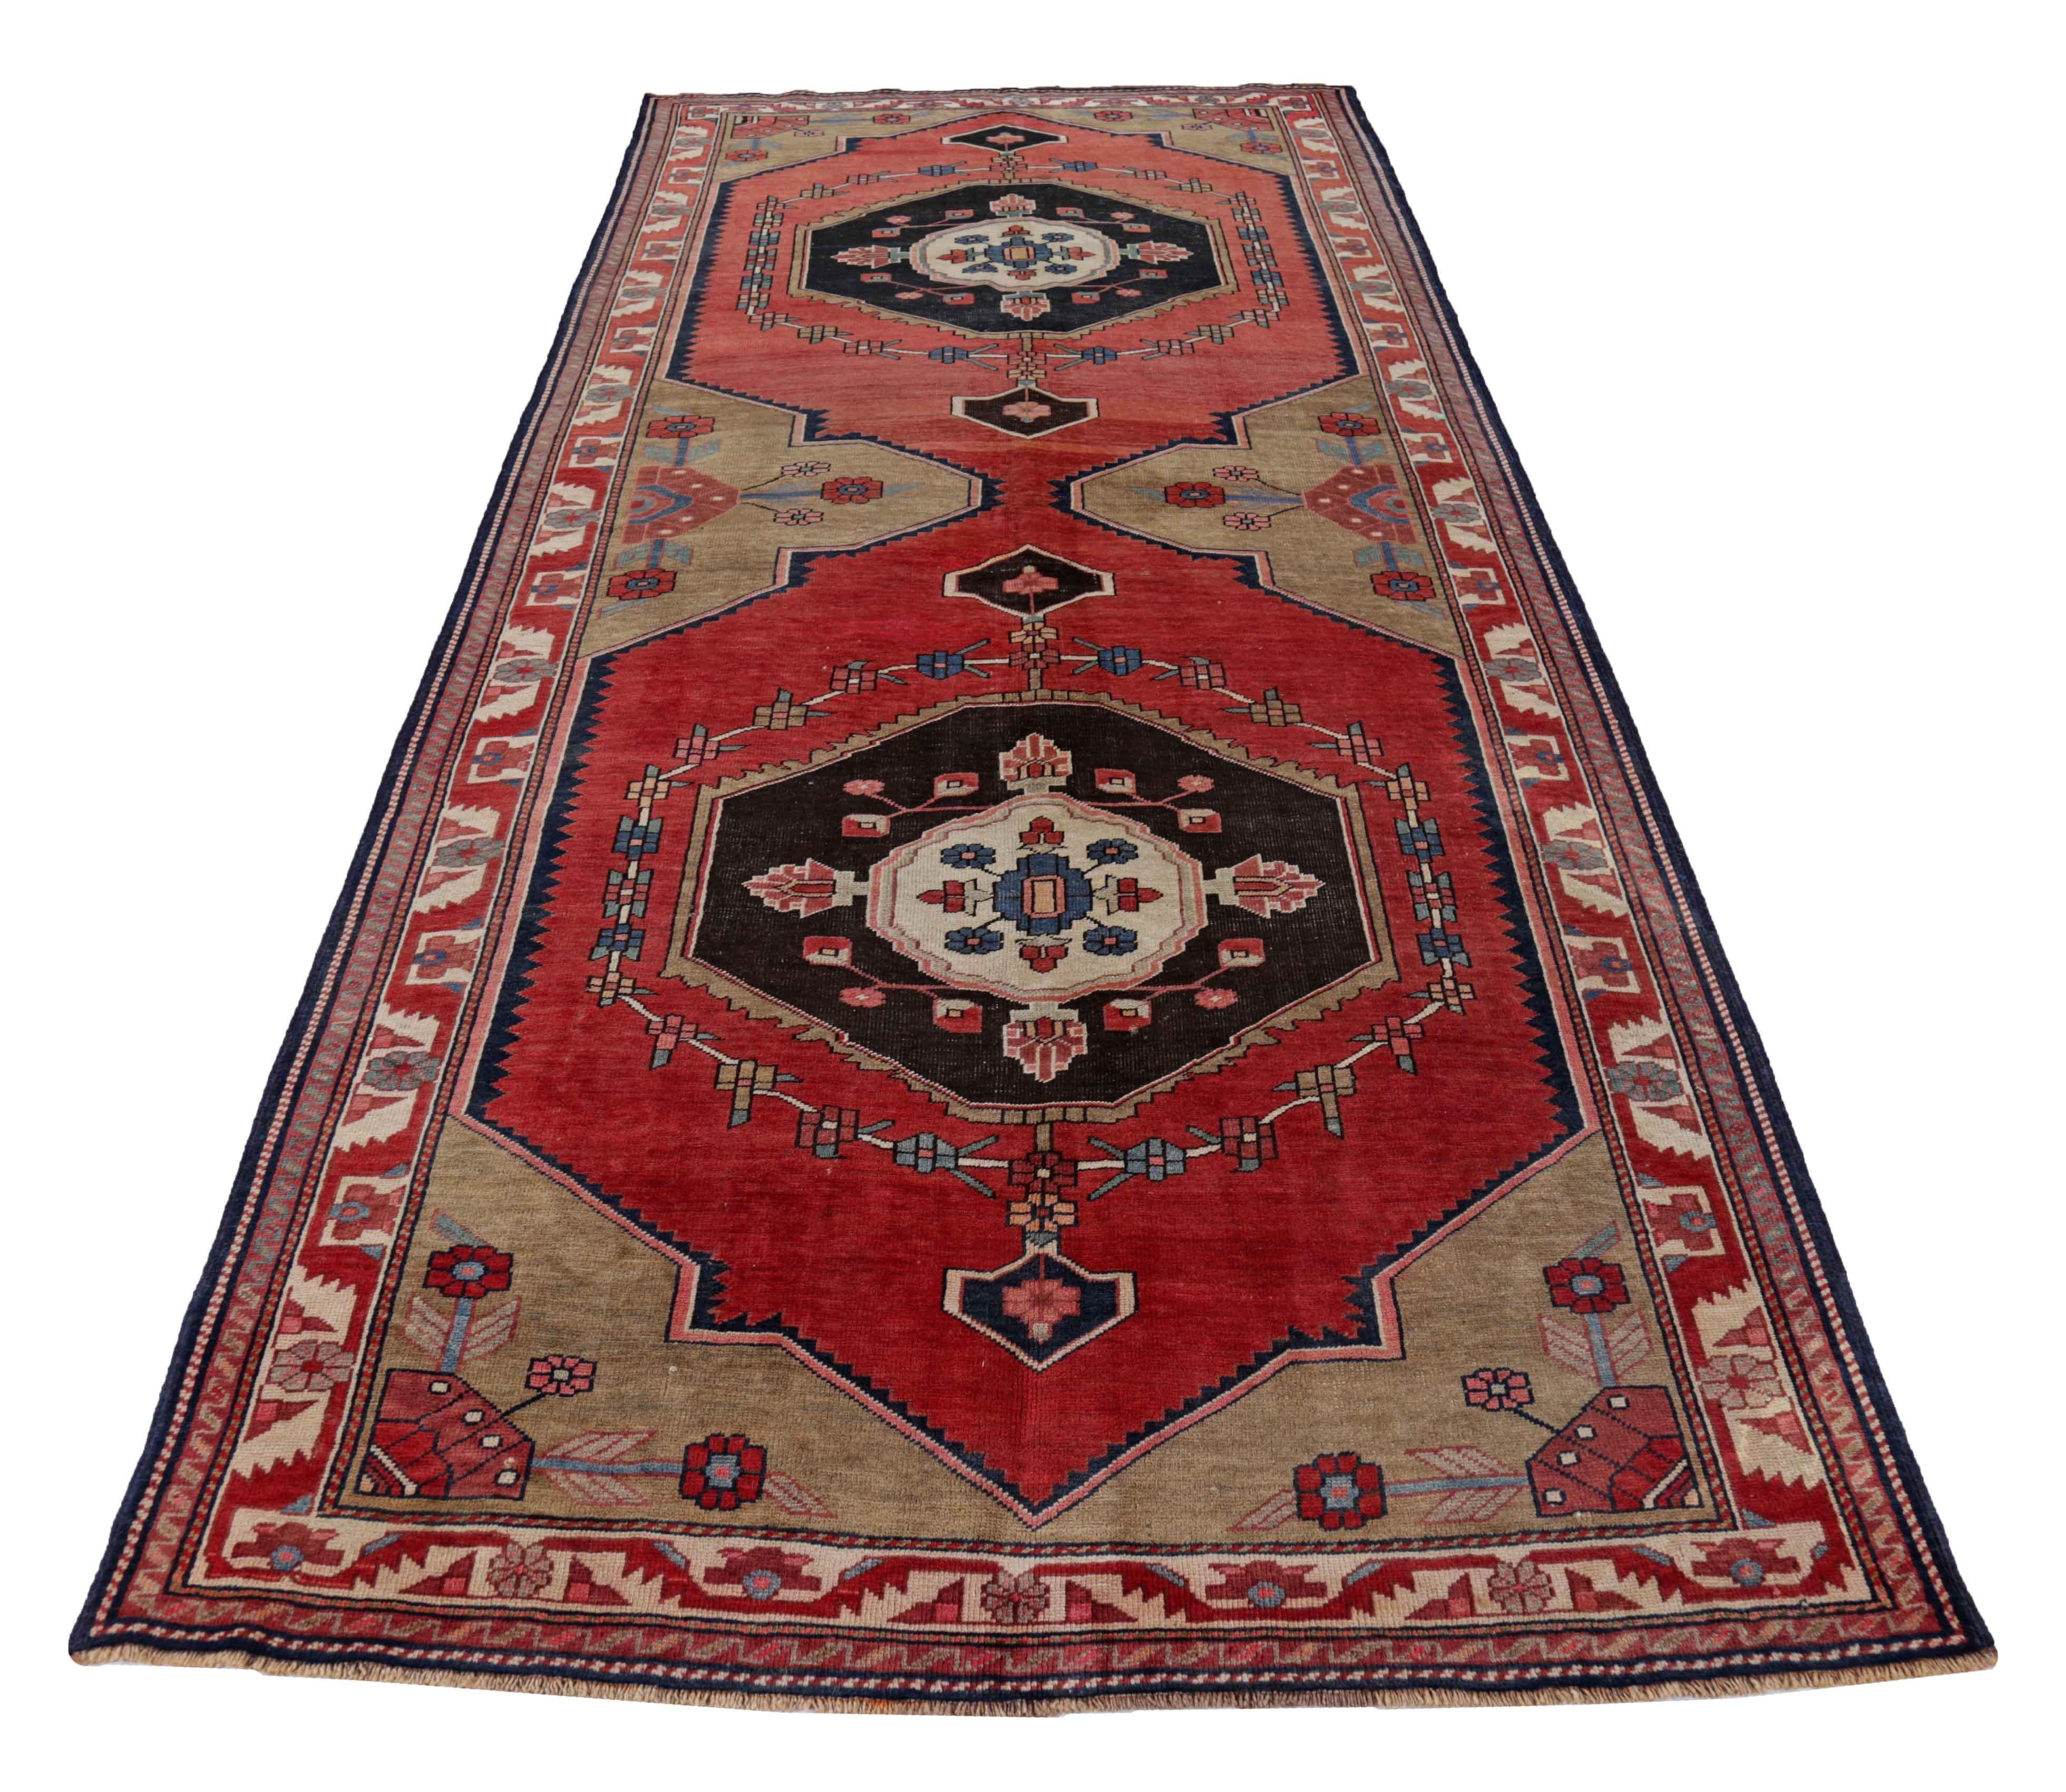 Antique Persian area rug handwoven from the finest sheep’s wool. It’s colored with all-natural vegetable dyes that are safe for humans and pets. It’s a traditional Azerbaijan design handwoven by expert artisans. It’s a lovely area rug that can be